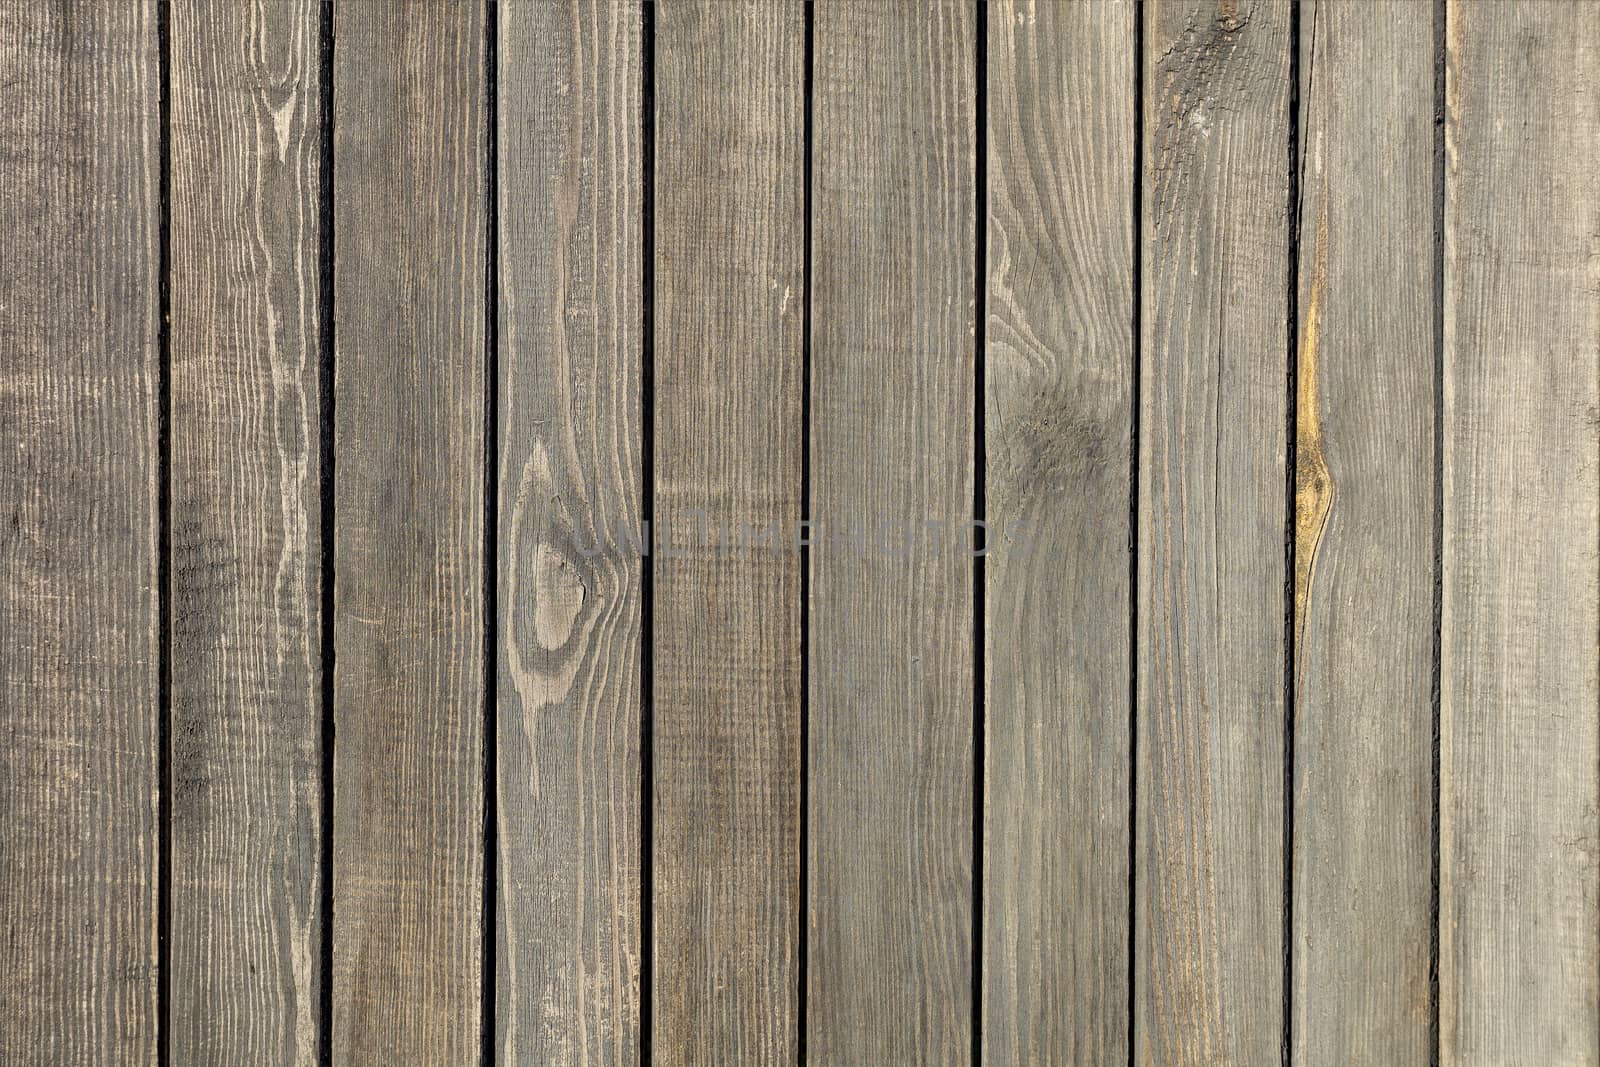 Weathered old gray wooden fence, vertical planks, close-up.